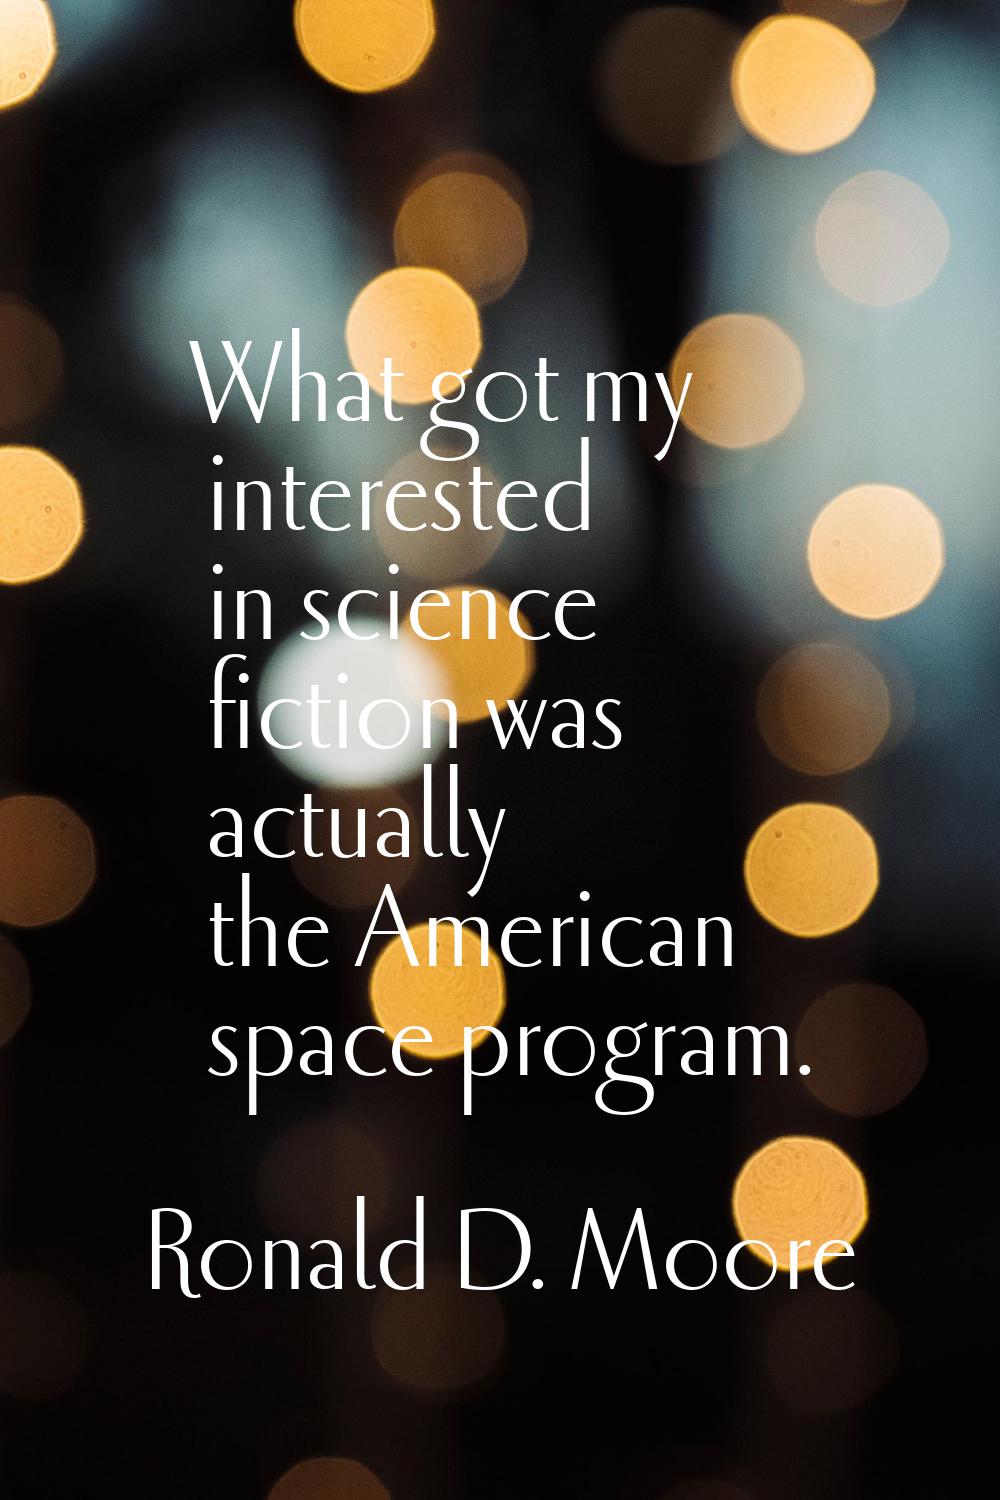 What got my interested in science fiction was actually the American space program.